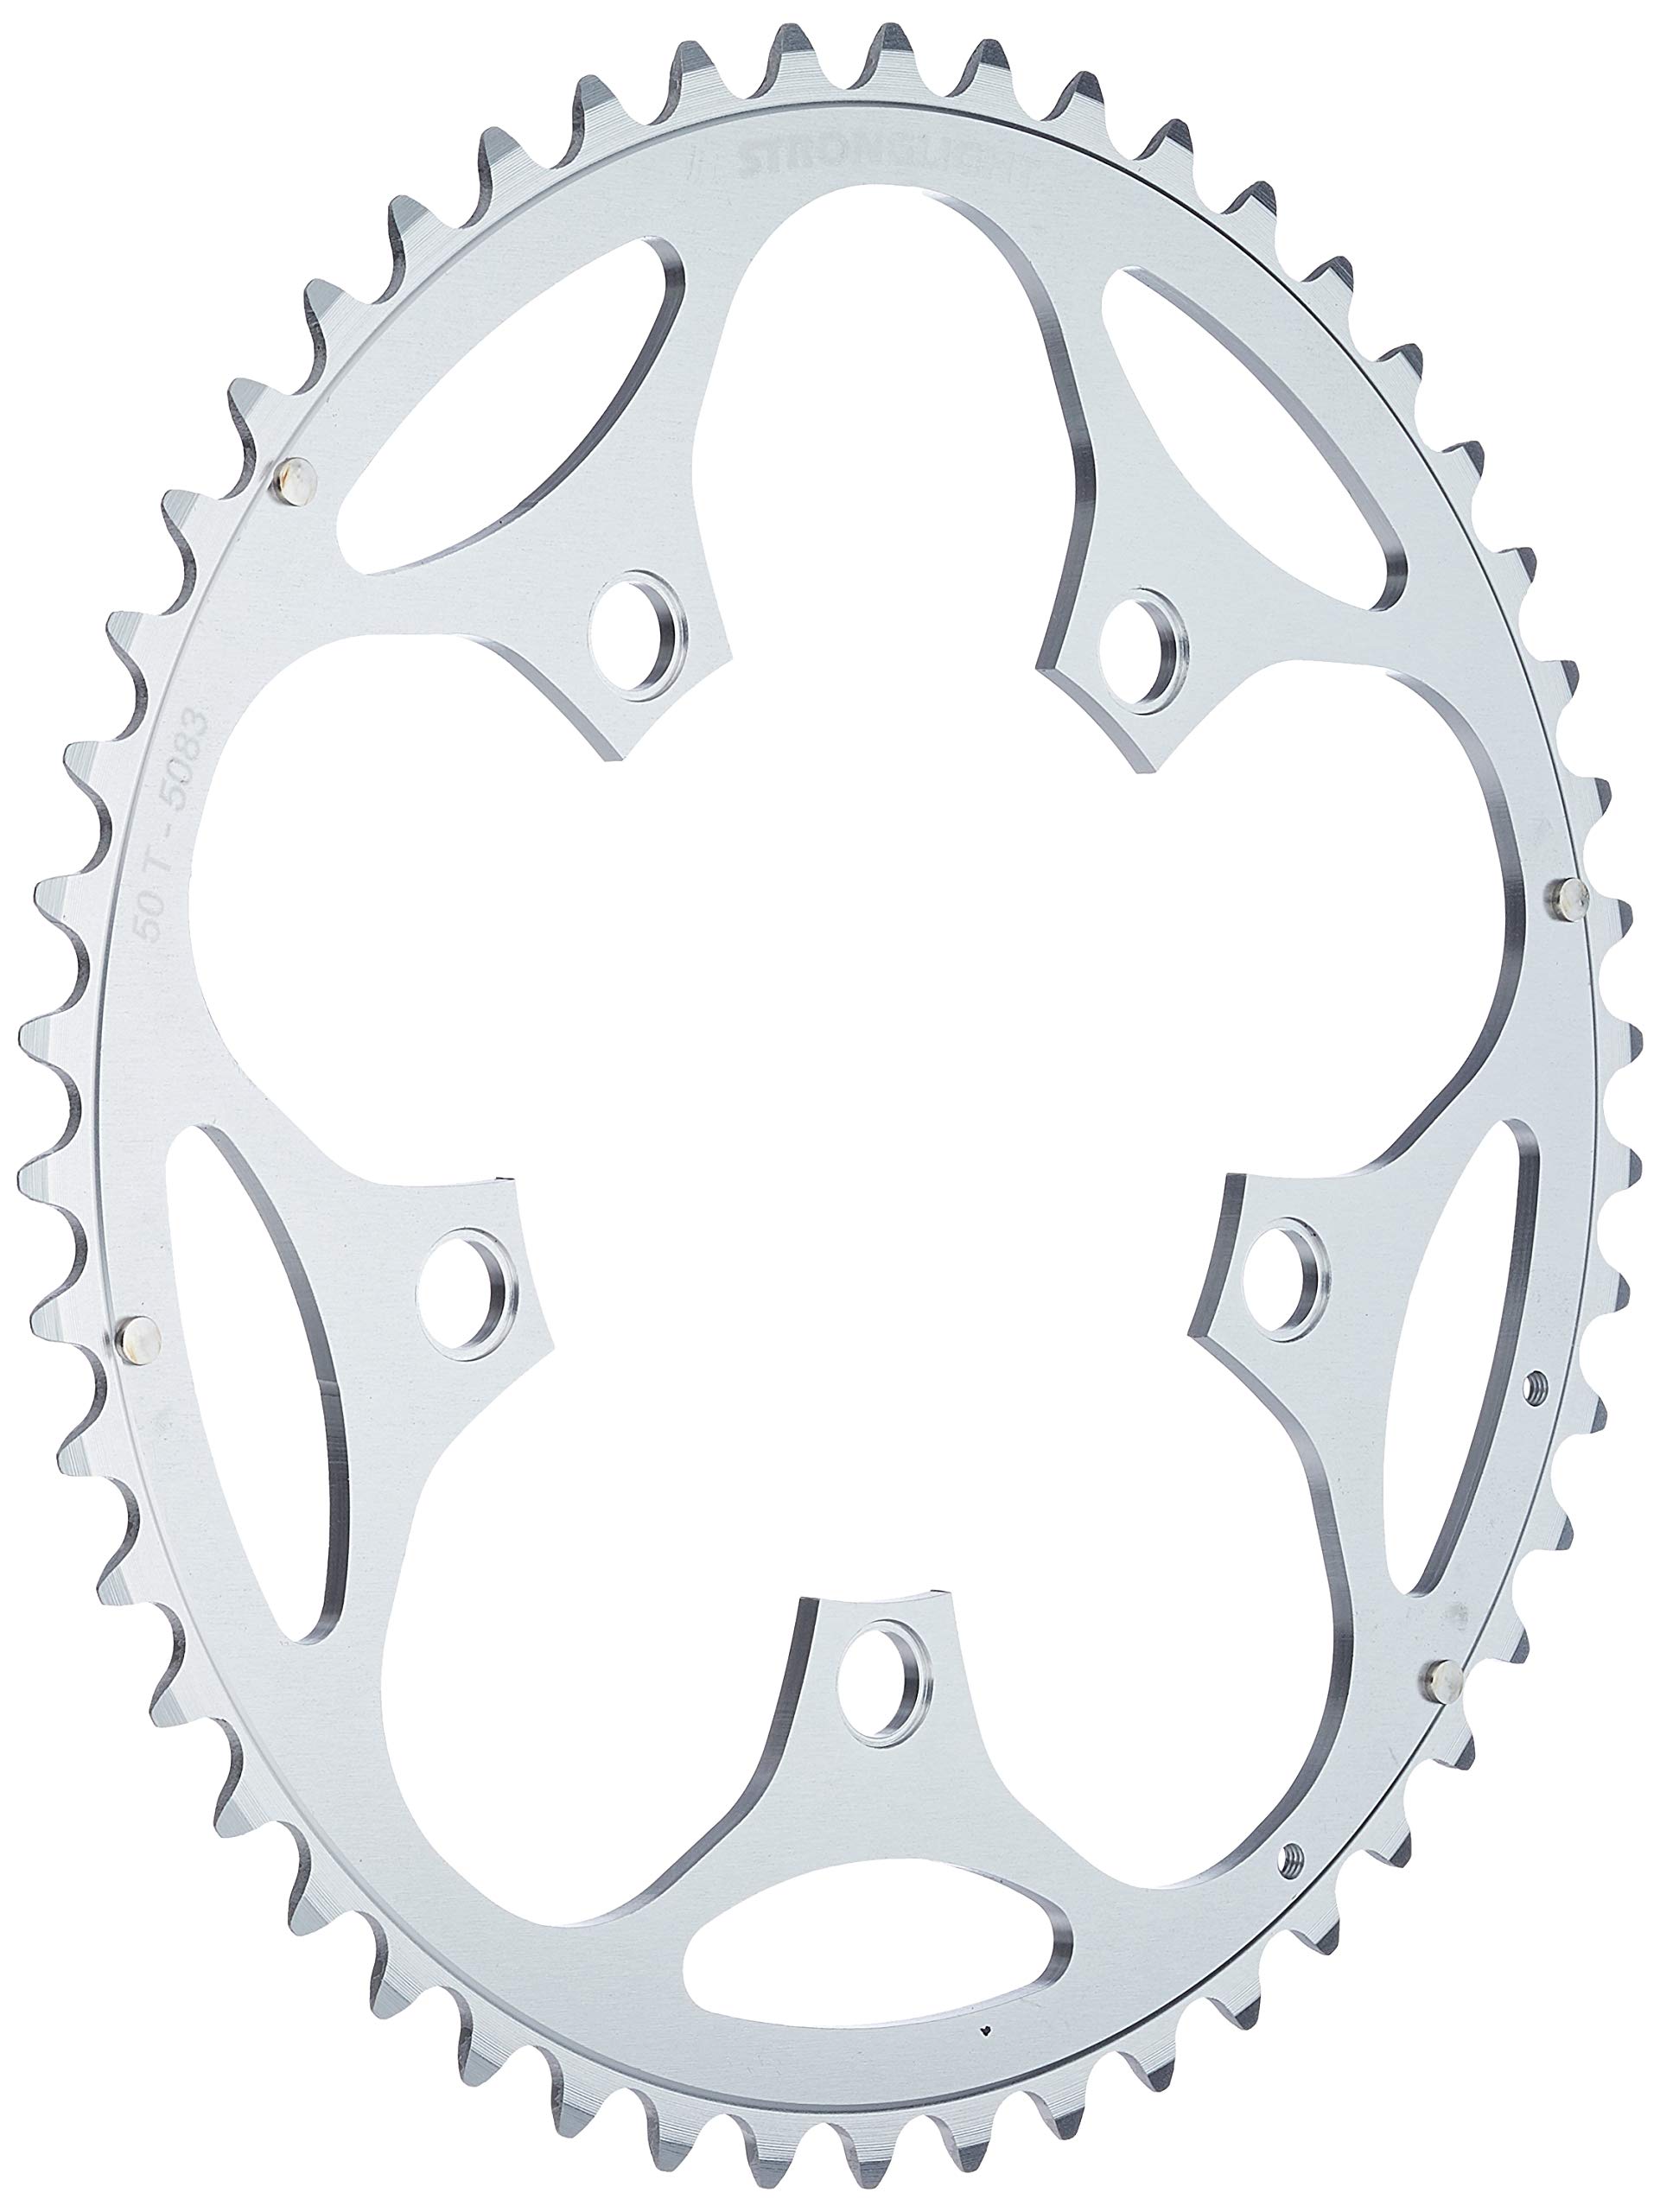 RD11034S Stronglight 34T Silver 5-Arm Alloy Chainring